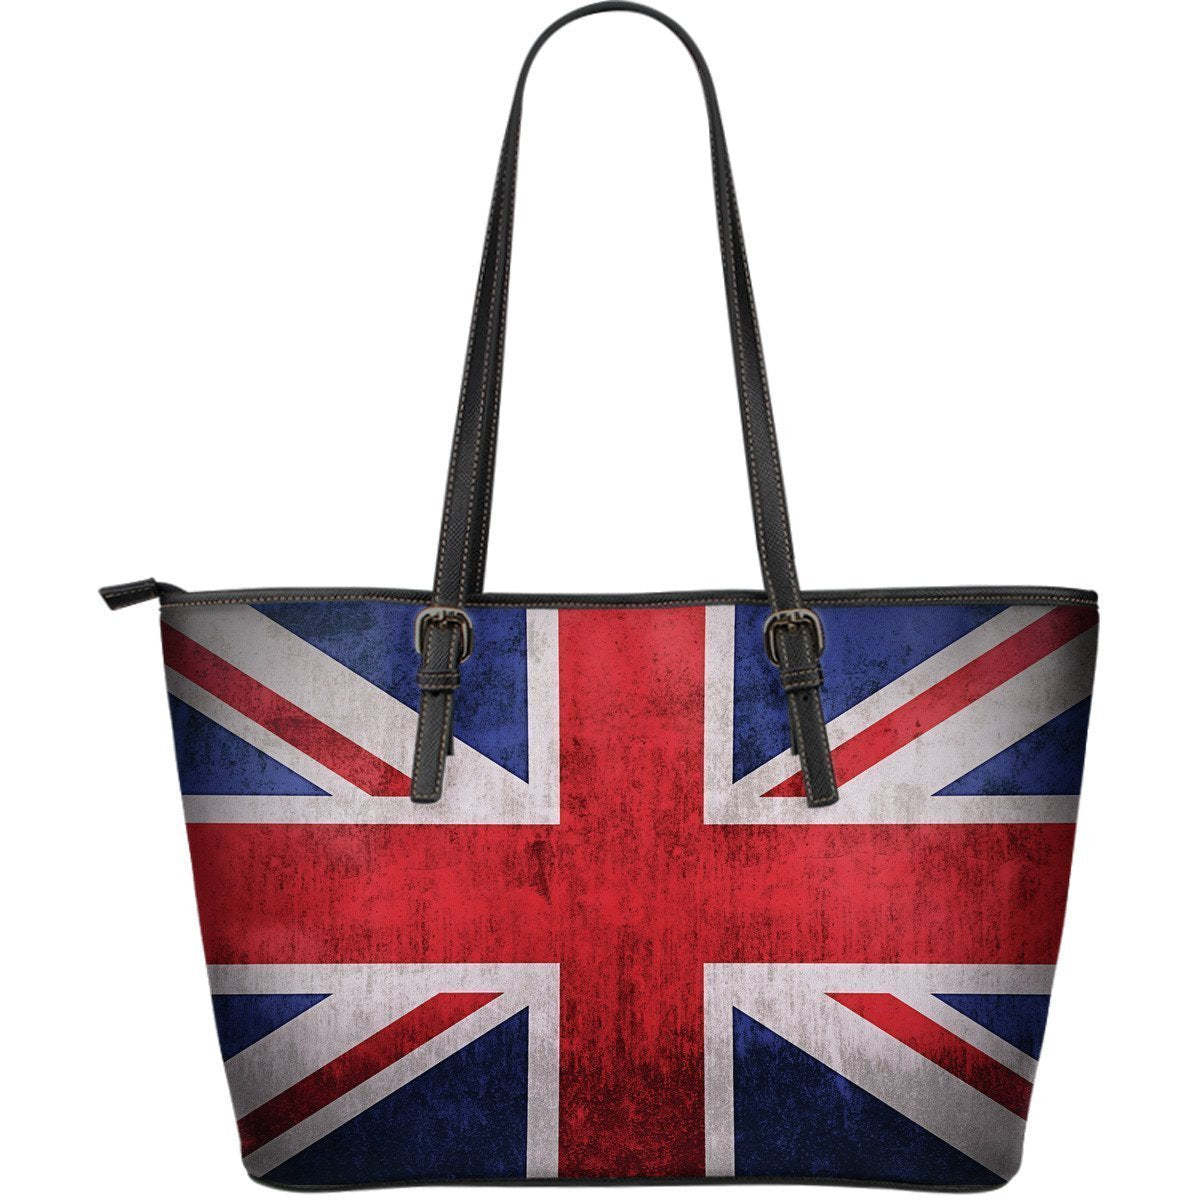 Rough Union Jack British Flag Print Leather Tote Bag GearFrost